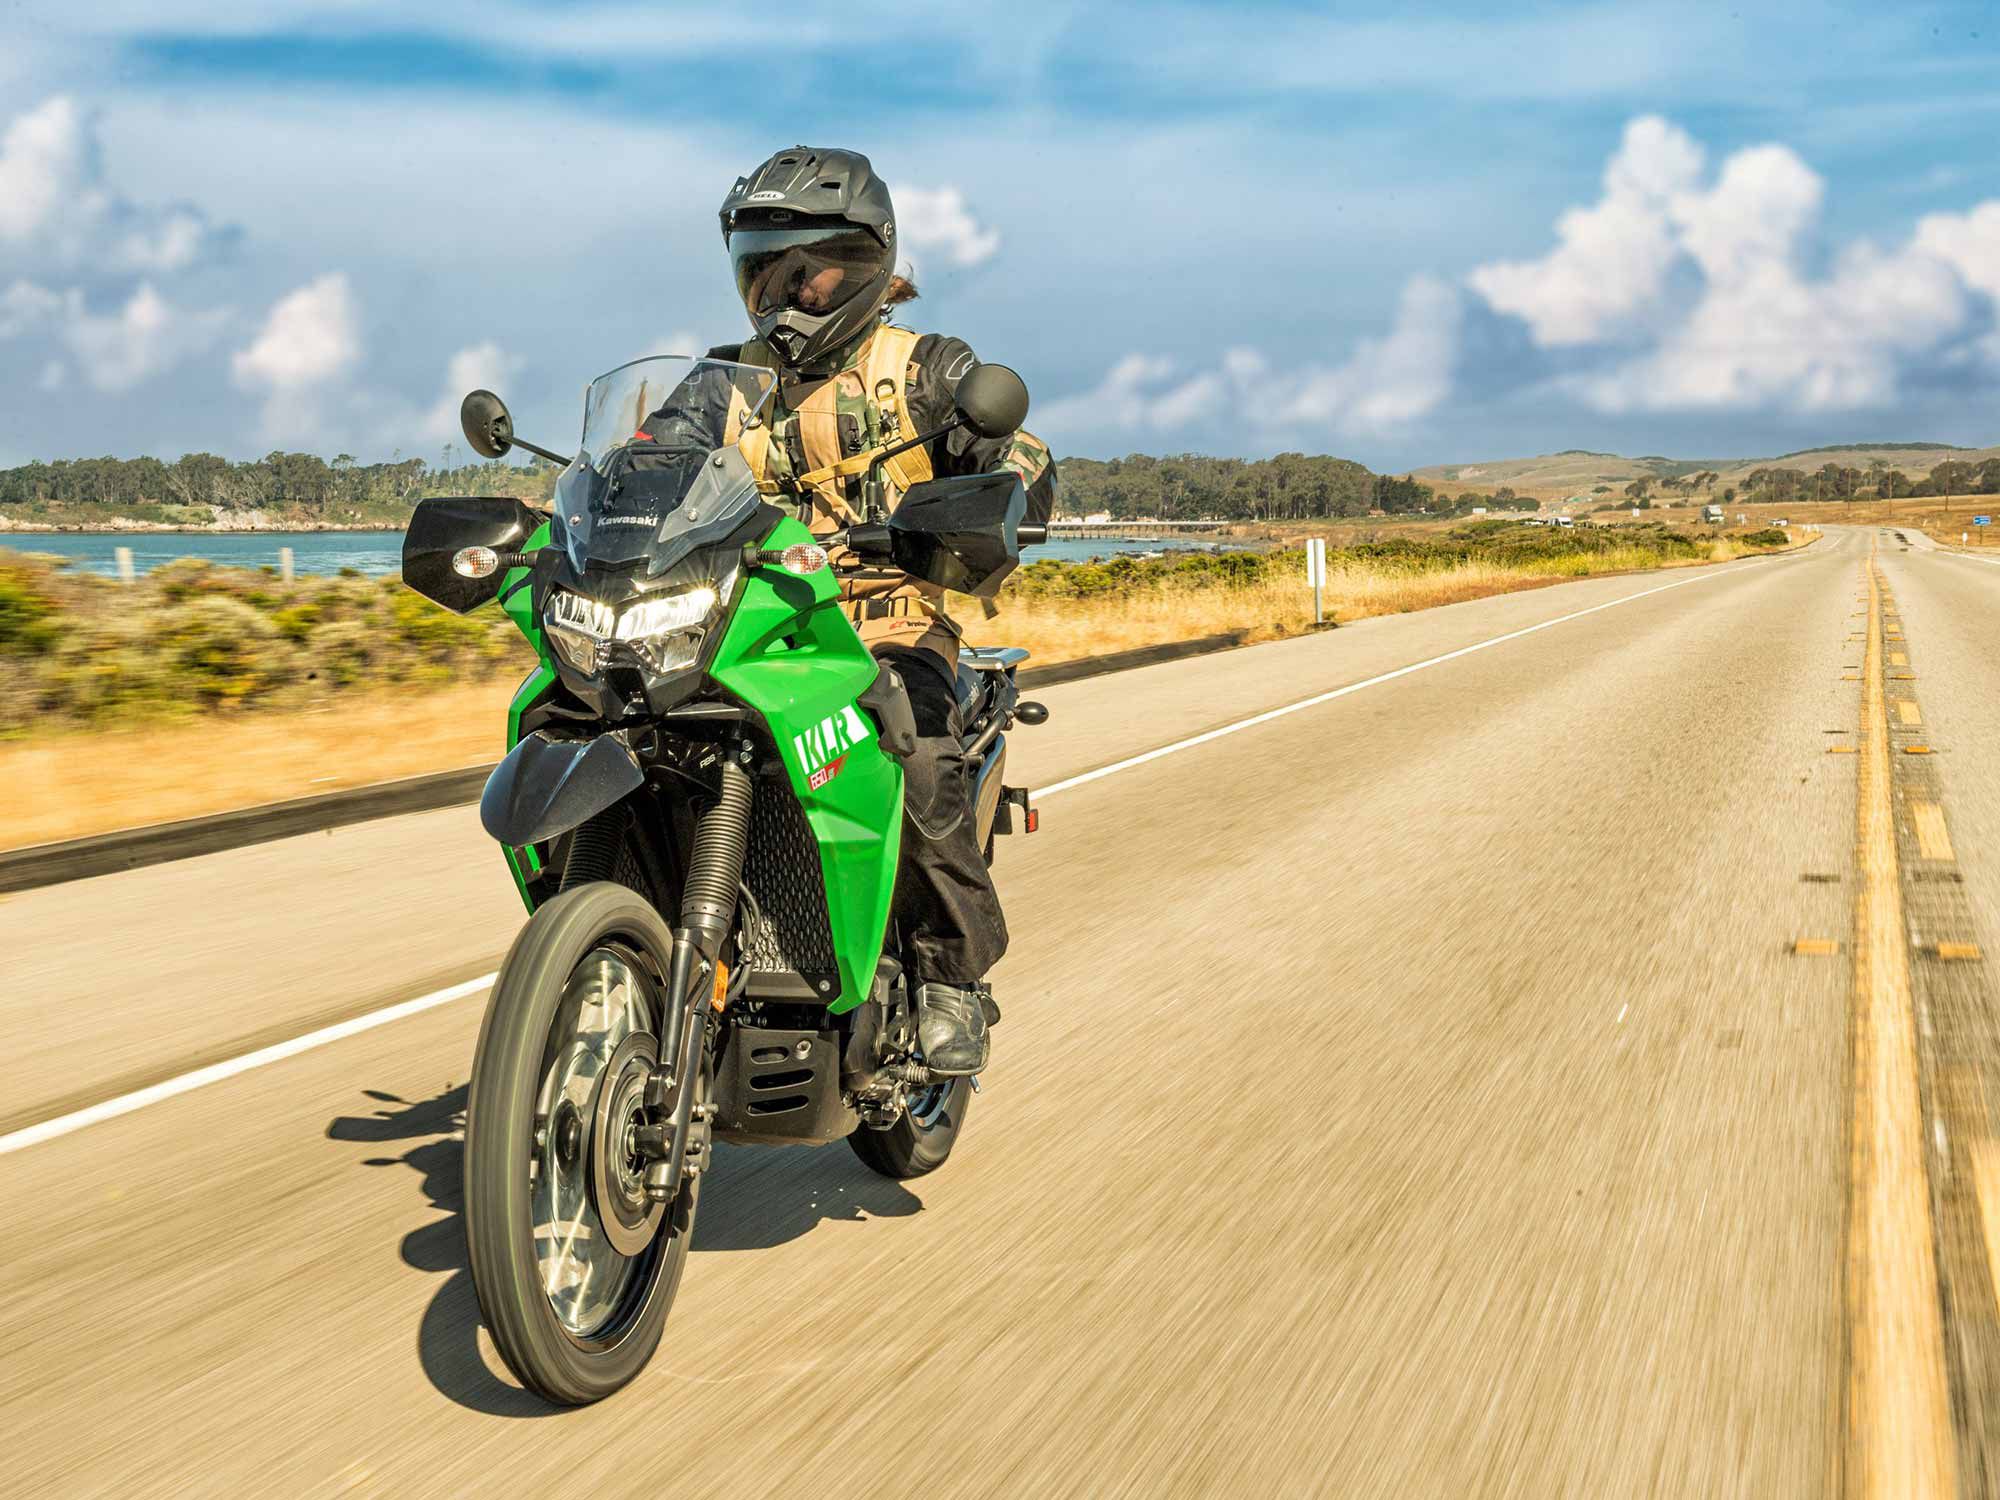 In typical KLR fashion, riding comfort includes standard hand guards and an adjustable windscreen.